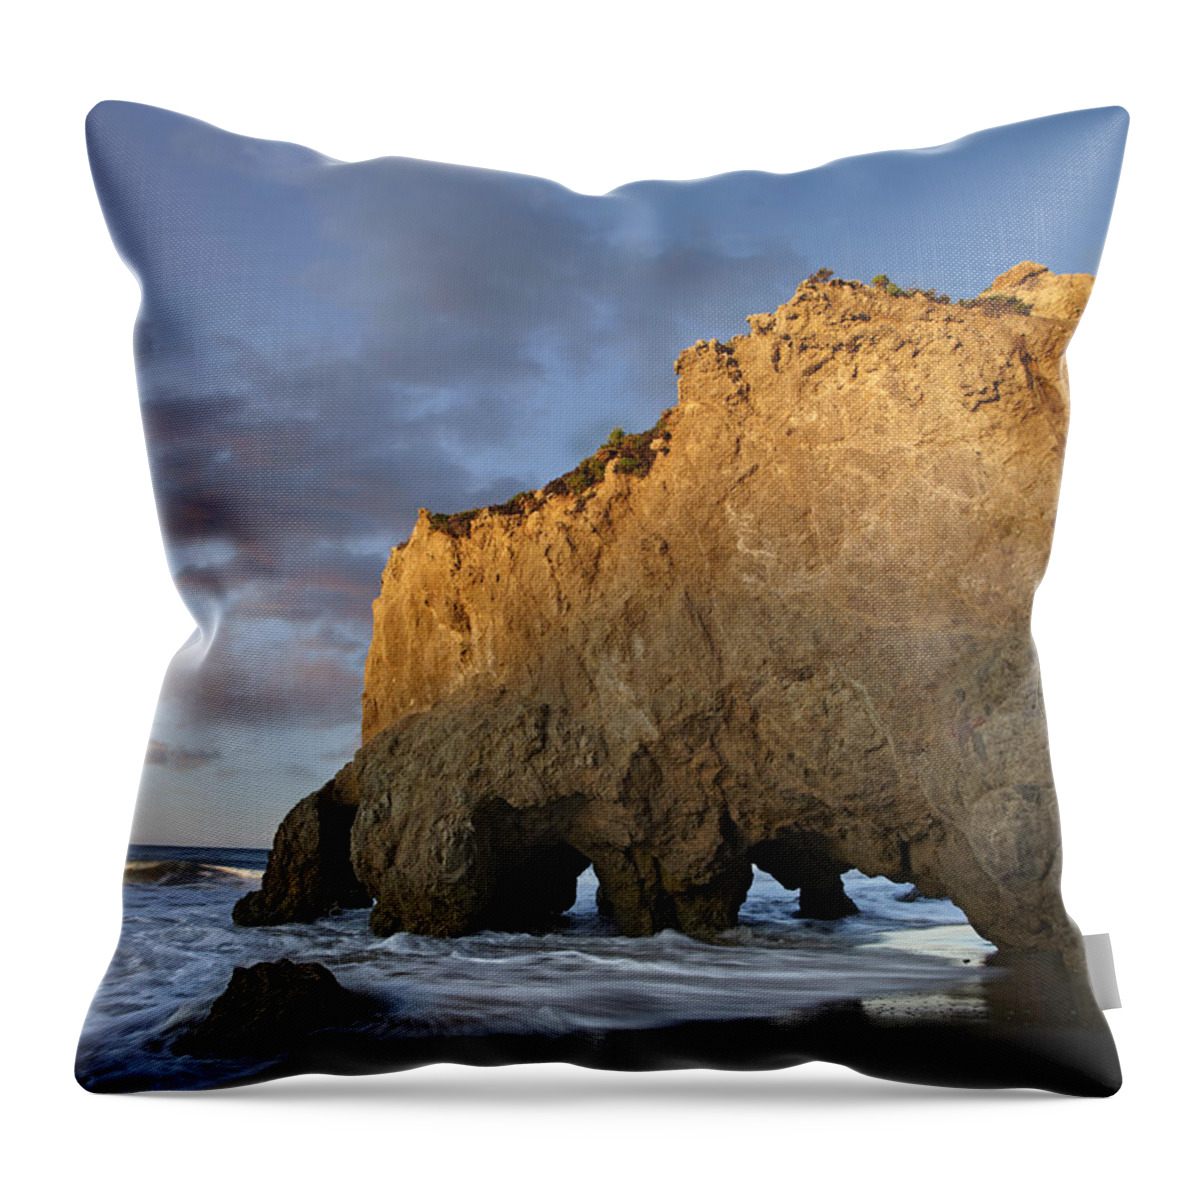 00443045 Throw Pillow featuring the photograph Natural Bridge On El Matador State by Tim Fitzharris